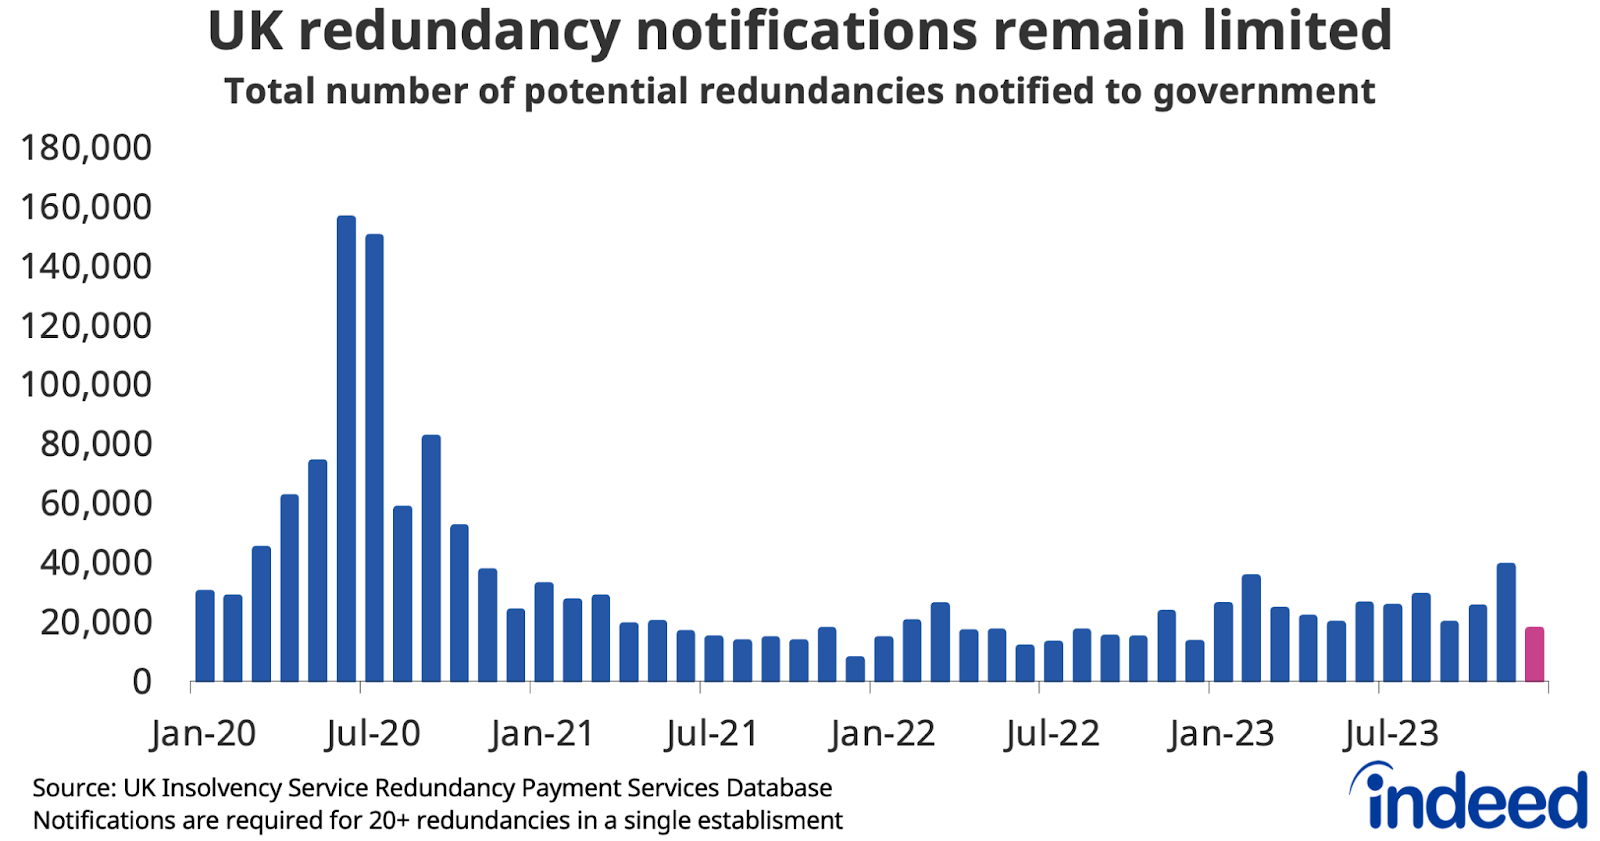 Bar chart titled “UK redundancy notifications remain limited” shows the monthly total number of potential redundancies notified to the UK government from January 2020 to December 2023. Redundancy notifications have remained modest in recent months. 